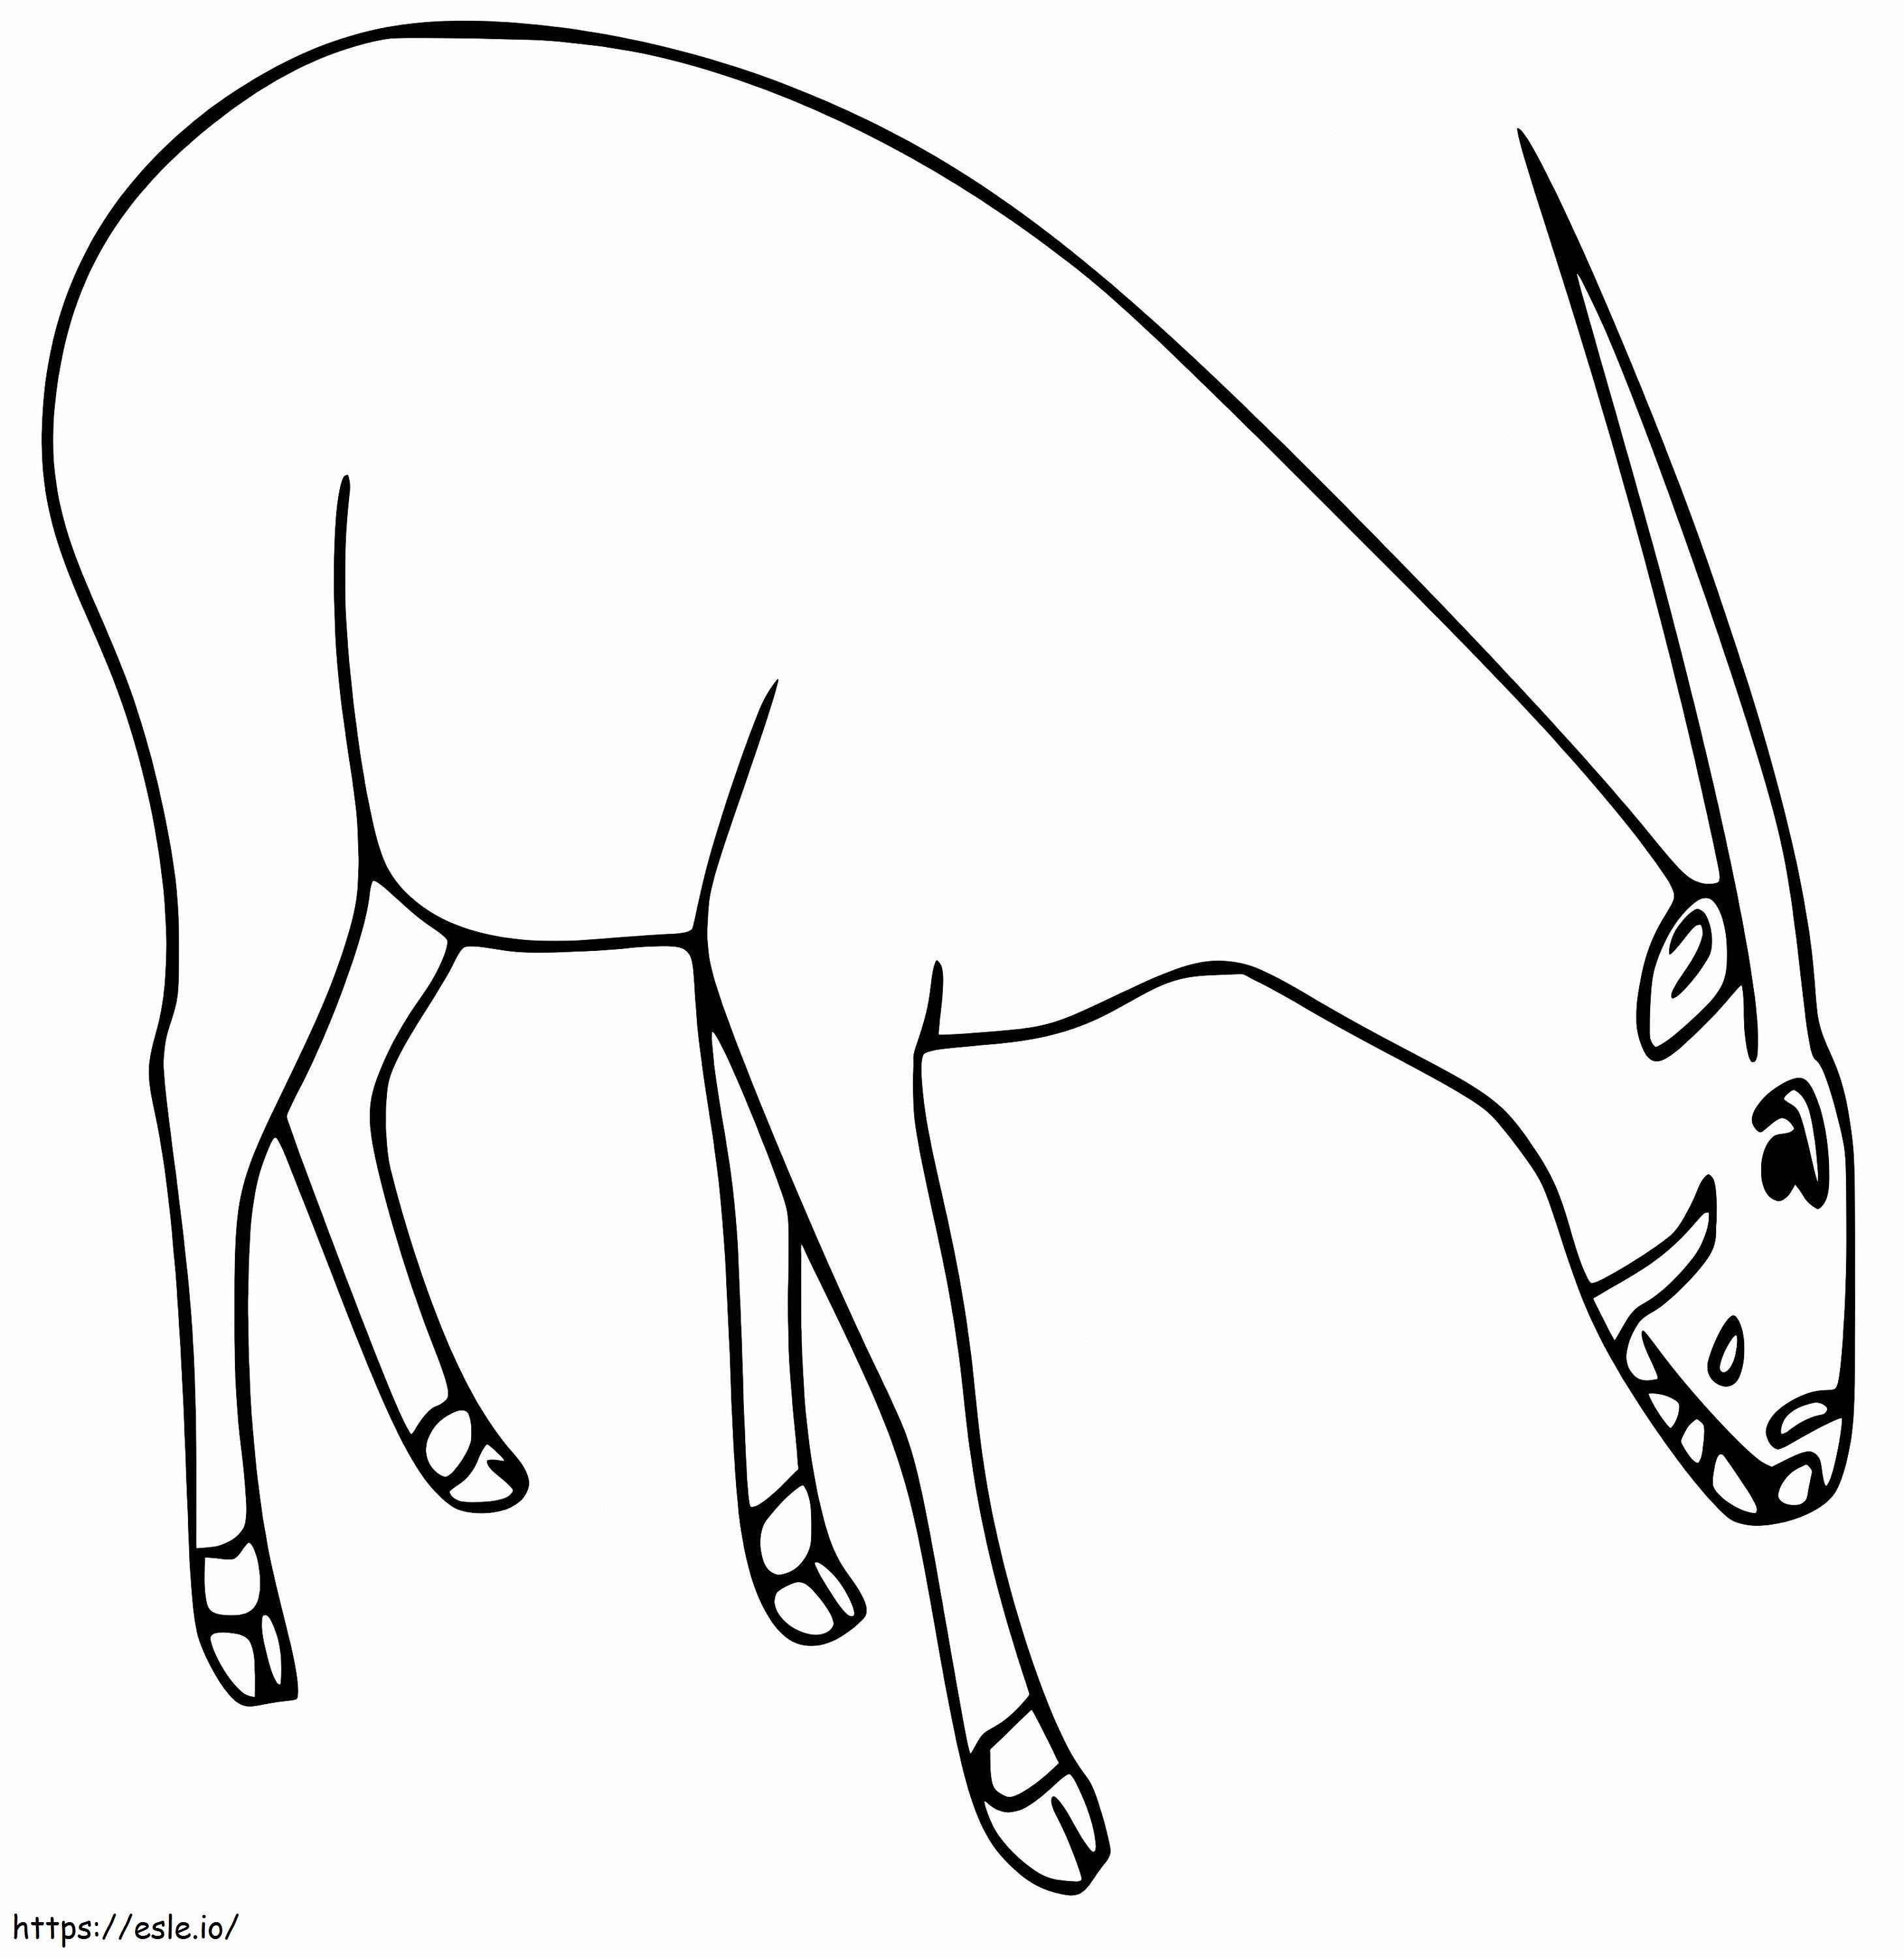 Easy Life coloring page